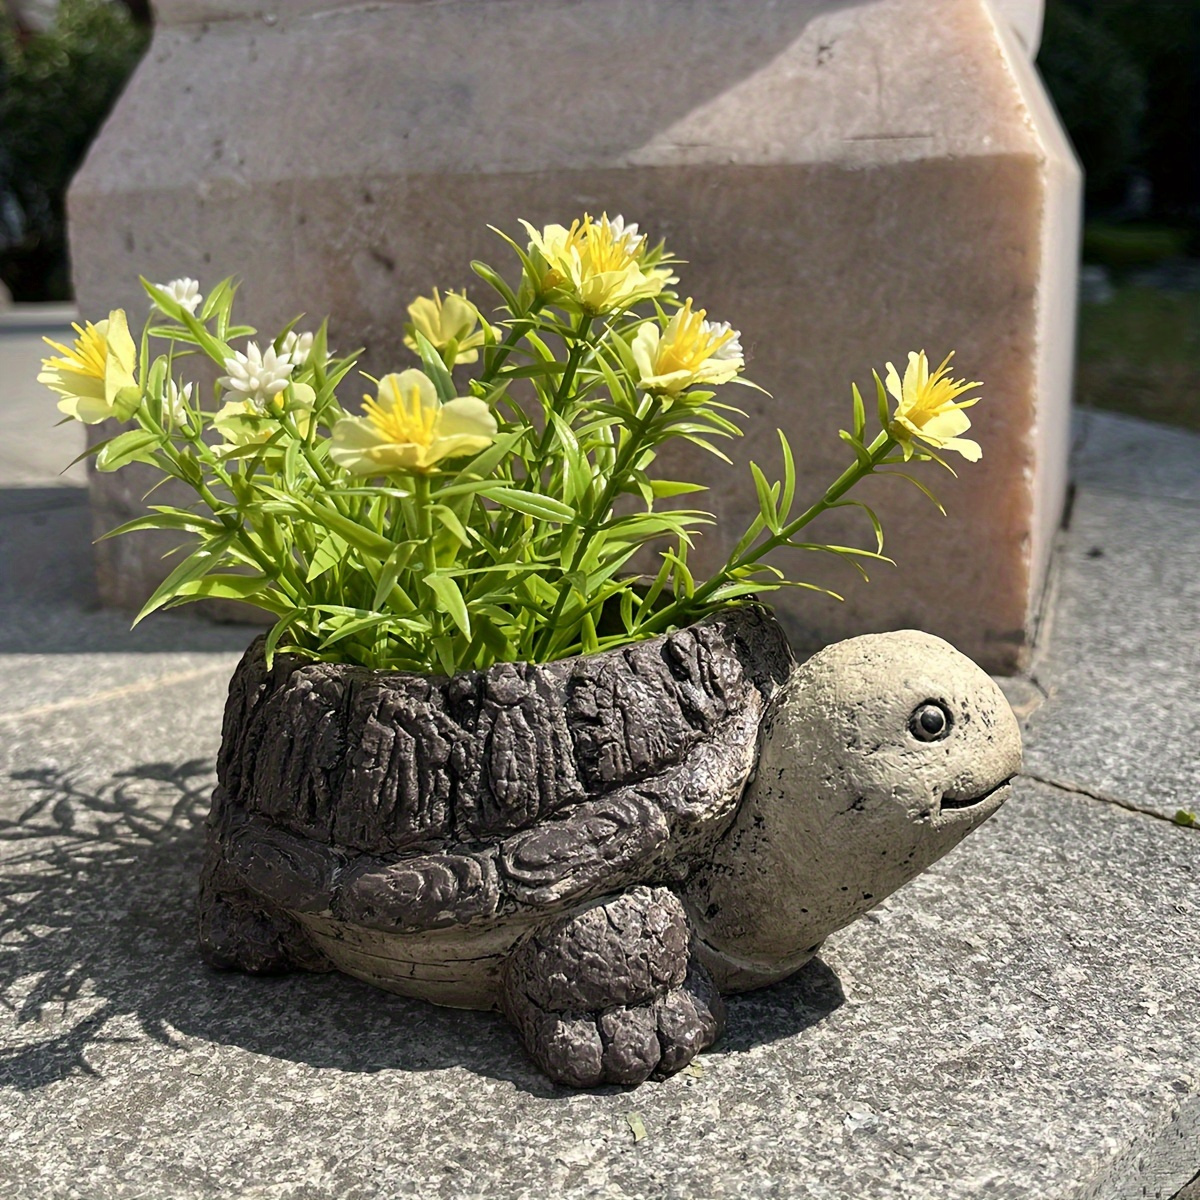 

Cute Little Turtle Planter Statue Resin Animal Succulent Flower Pot Container Decoration Beautifying Garden Yard